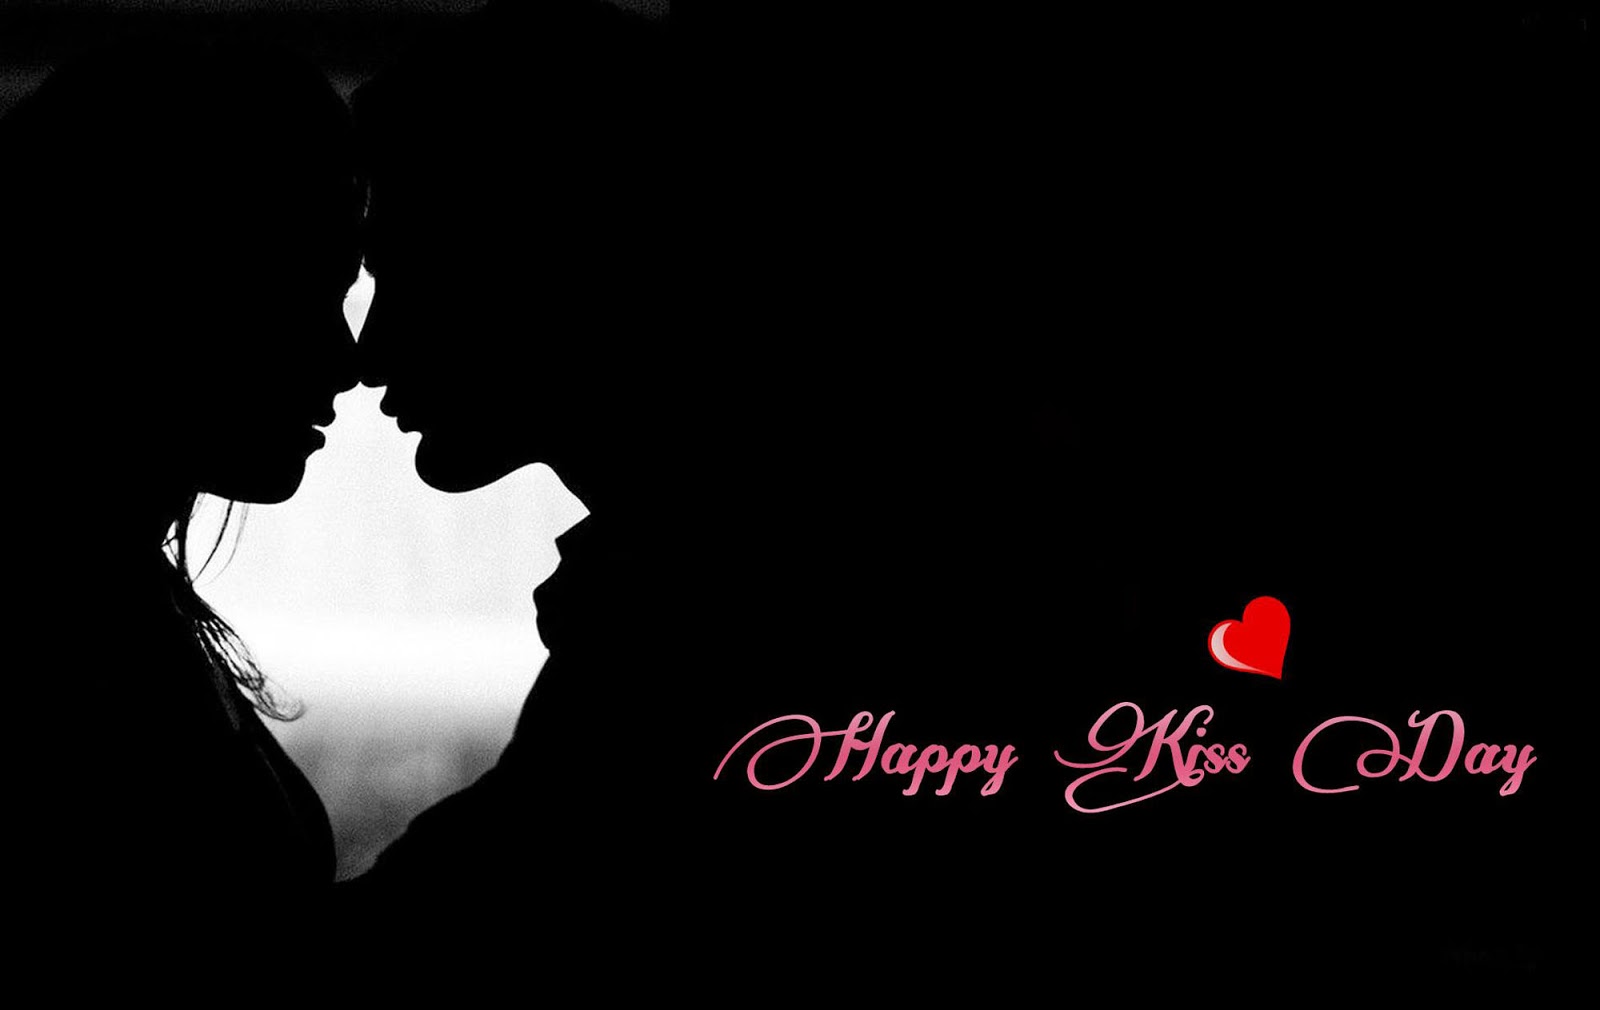 Kiss Day Best HD Wallpaper Image For